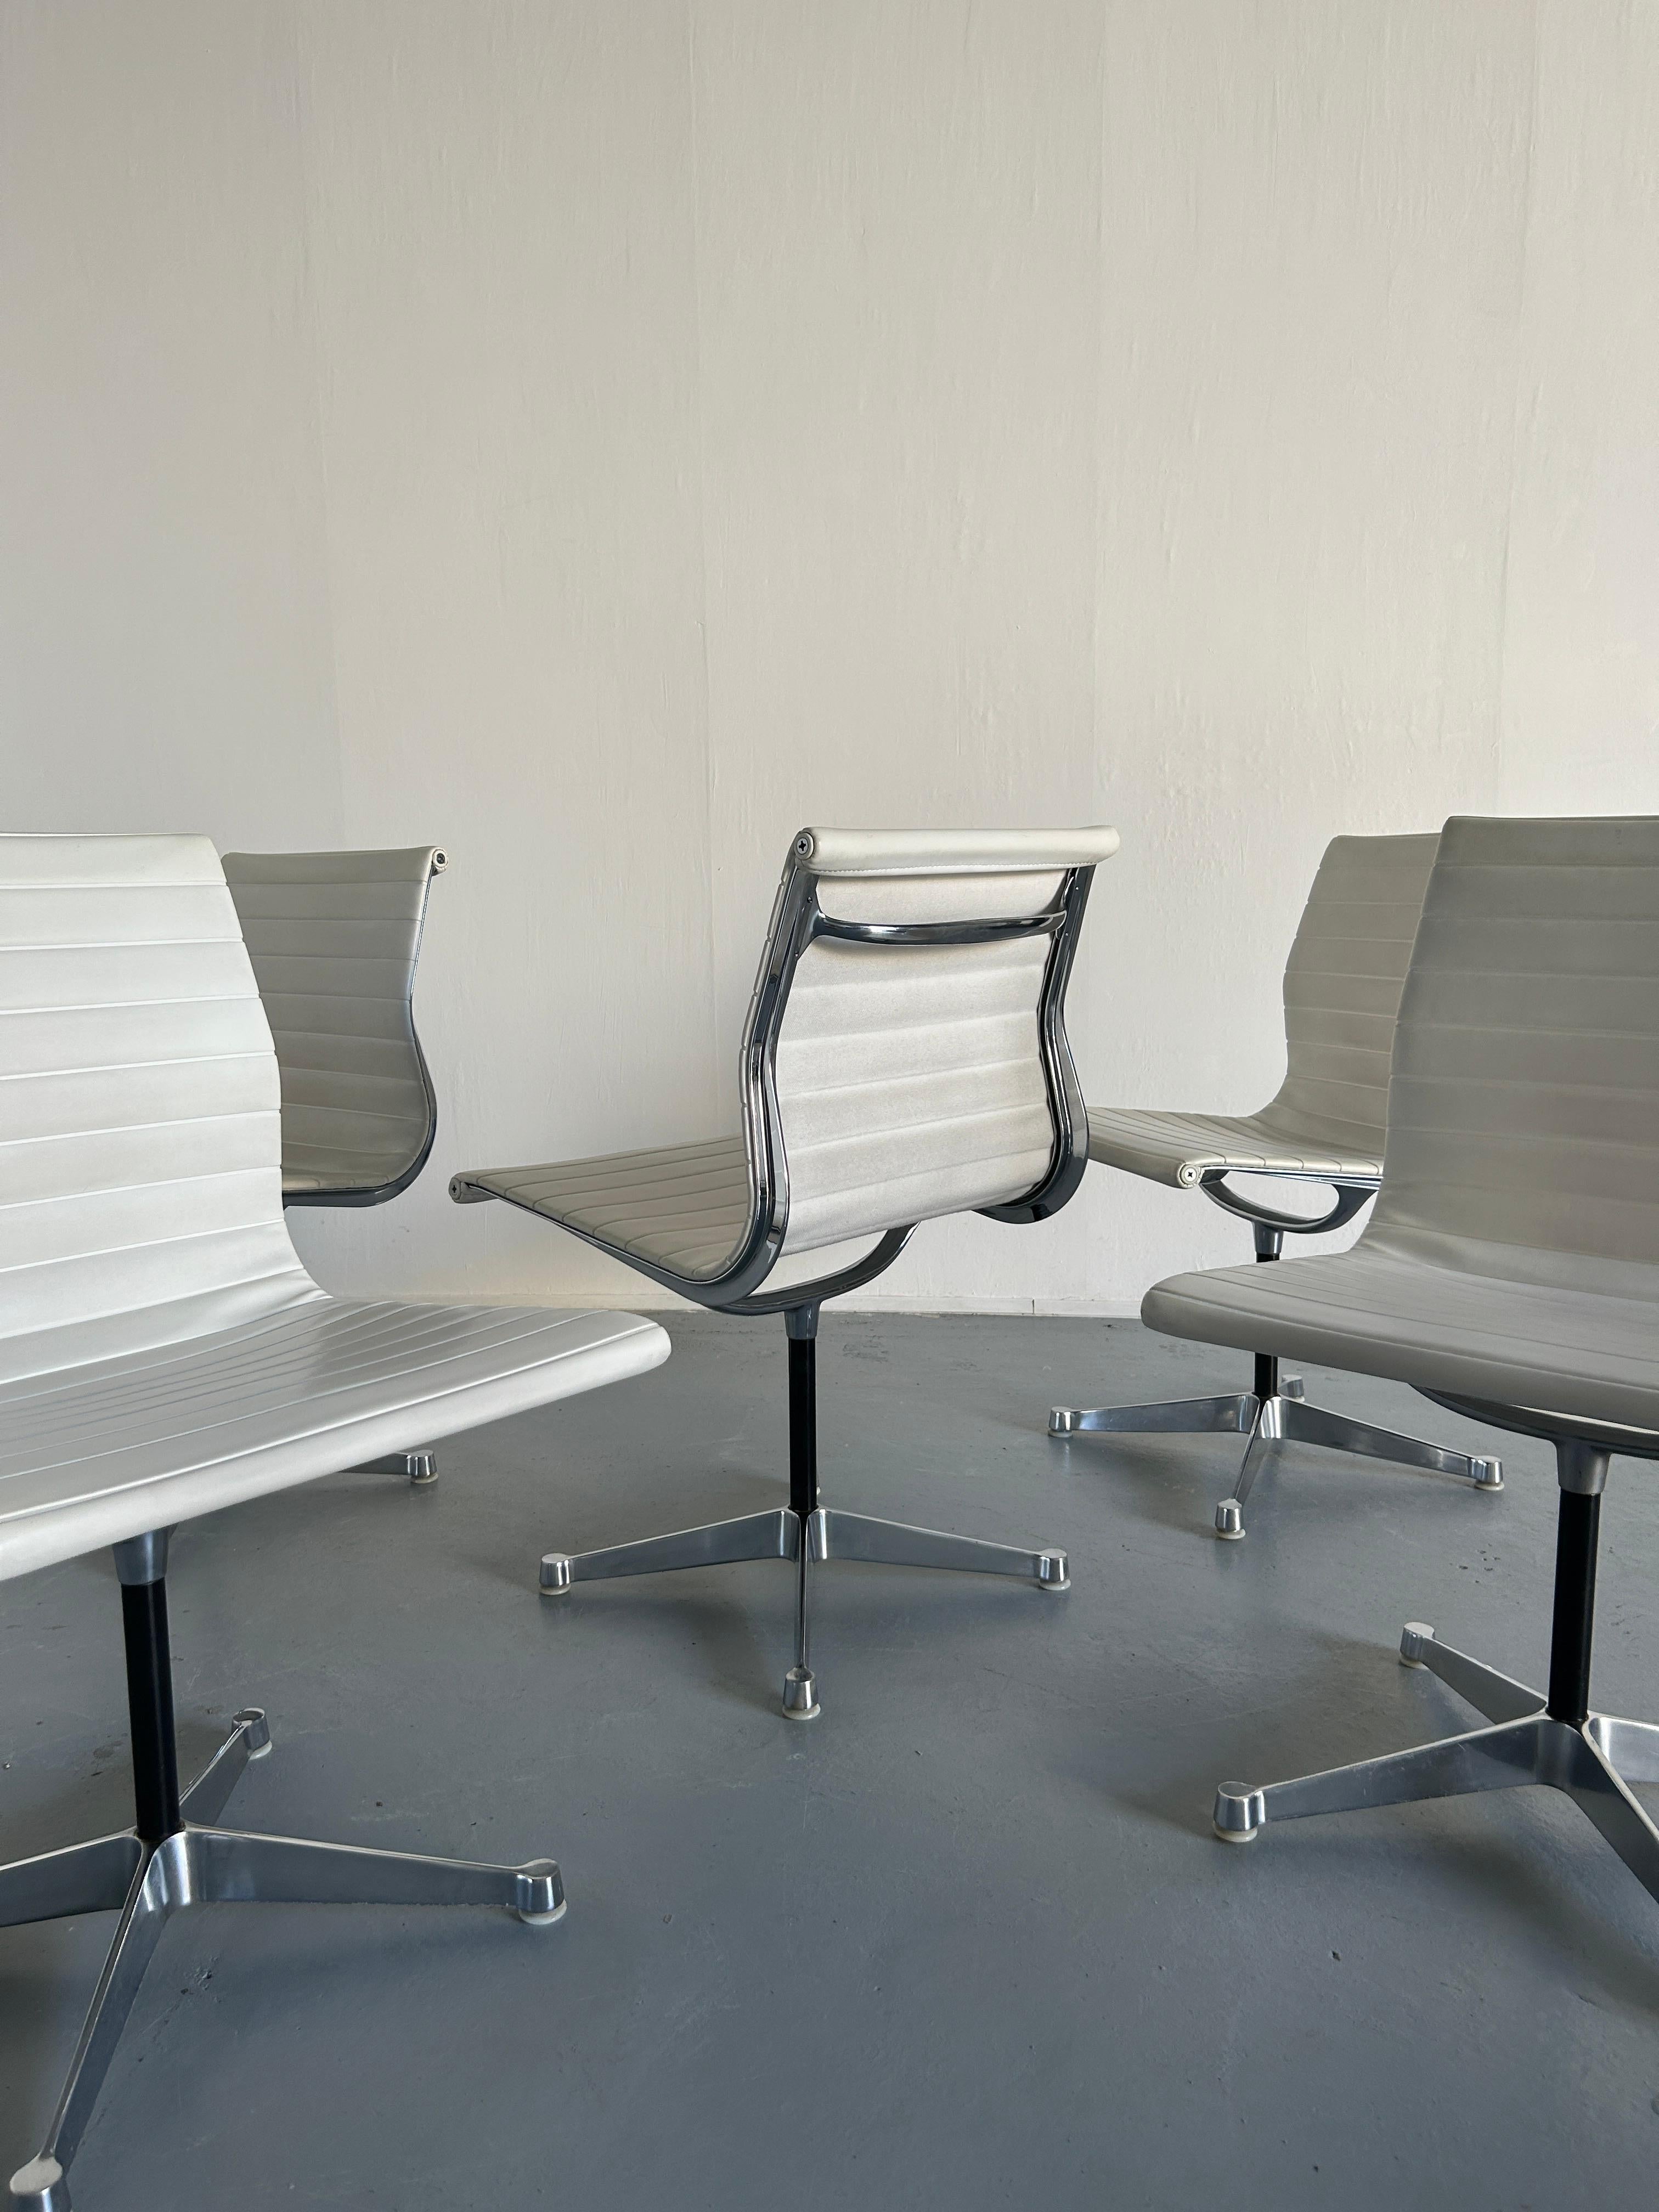 Late 20th Century 1 of 5 Original Vintage 'EA 107' Aluminium Desk Chairs by Charles & Ray Eames For Sale